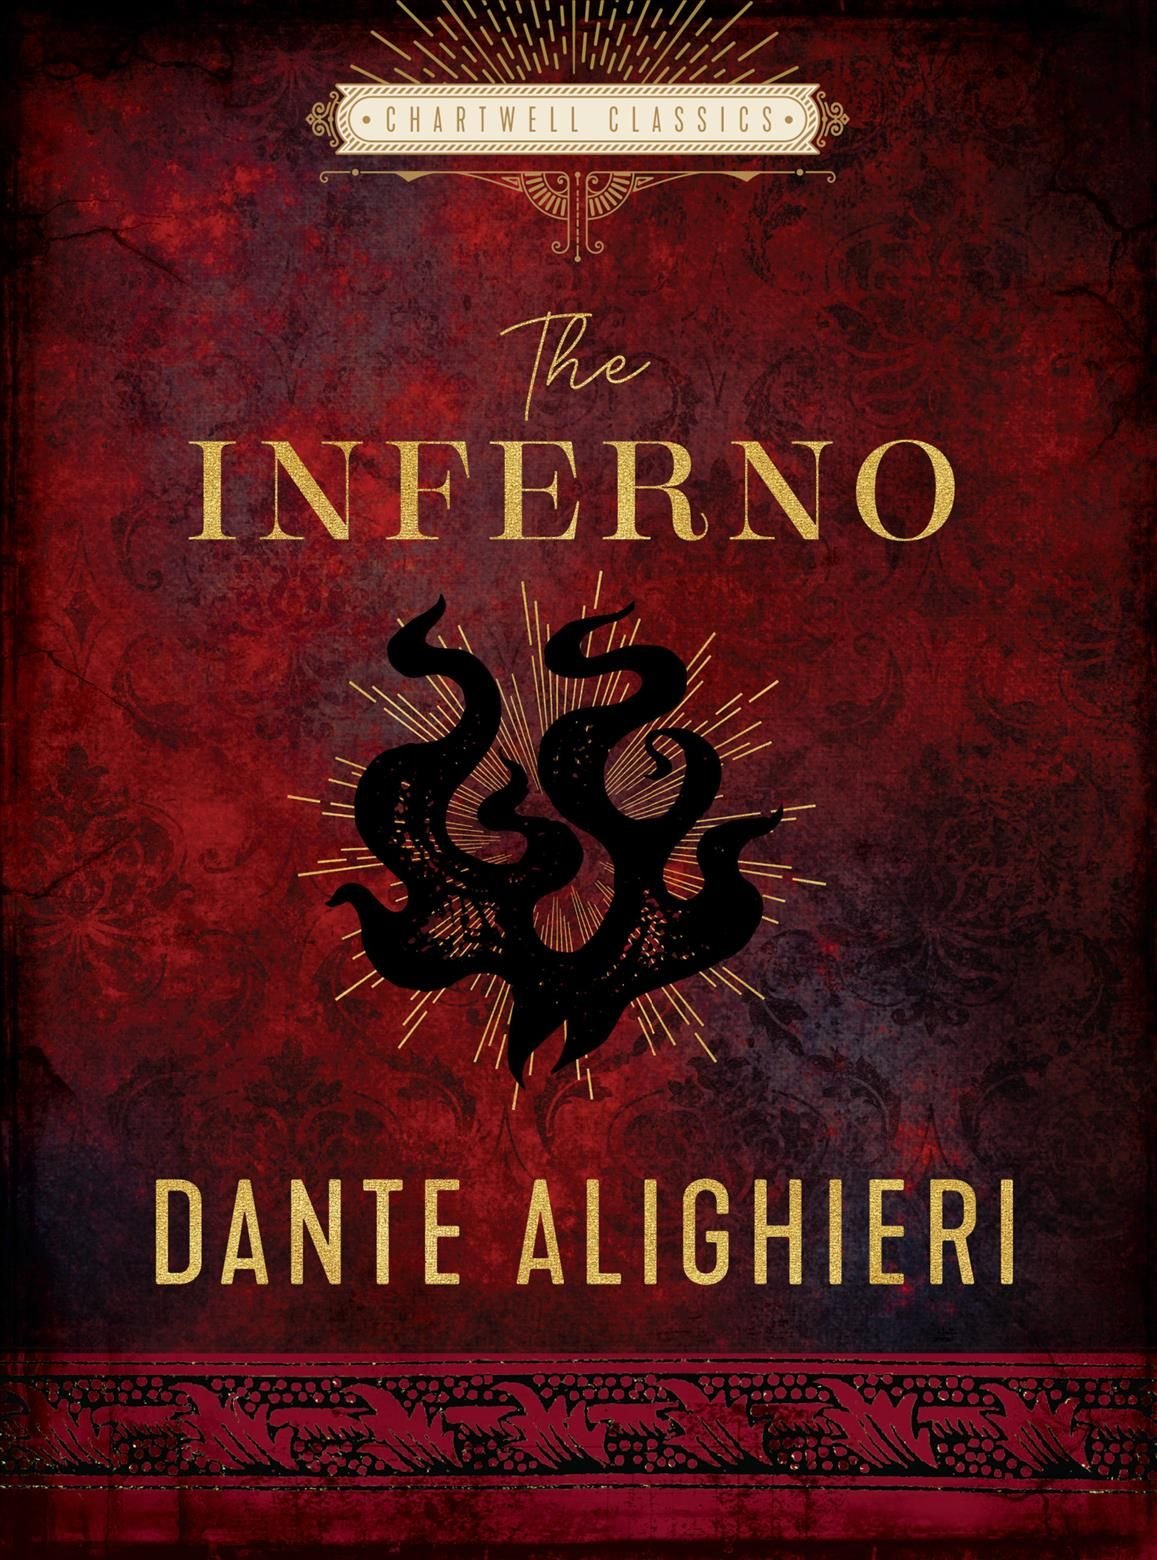 Harry)Dante's Inferno is the first of the three-part epic poem, D